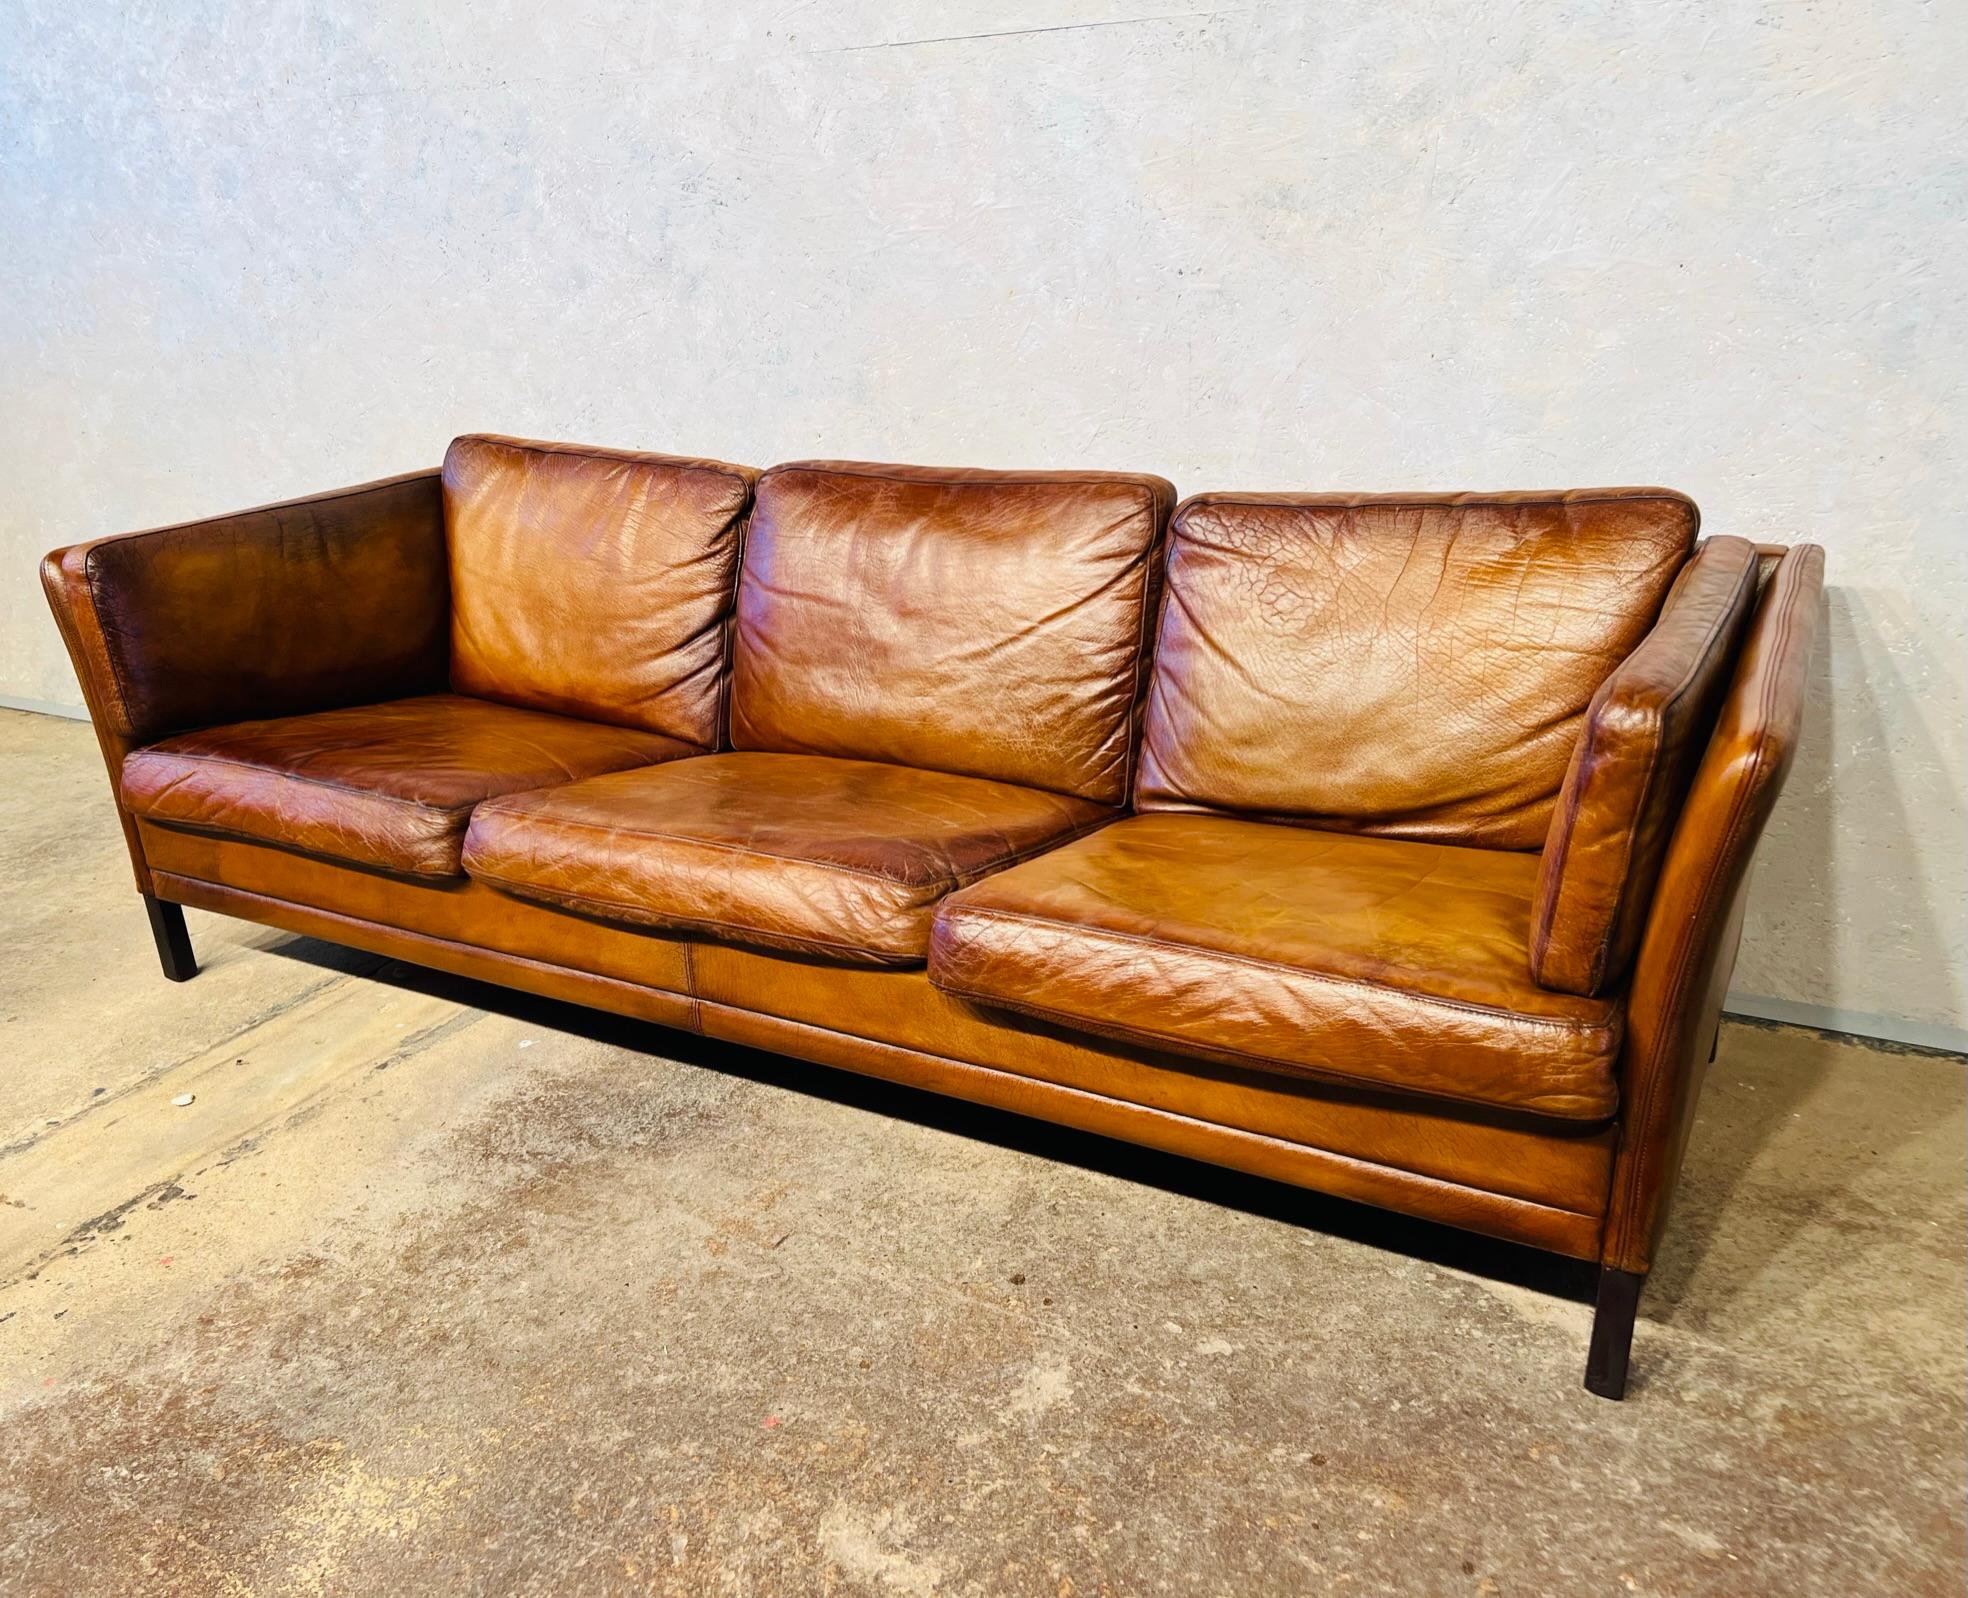 A Stylish 1970s Sofa designed by Mogens Hansen, great design with beautiful lines, sits wonderfully.

Stunning hand dyed tan colour, great patina and finish.

Viewings welcome at our showroom in Lewes, East Sussex.